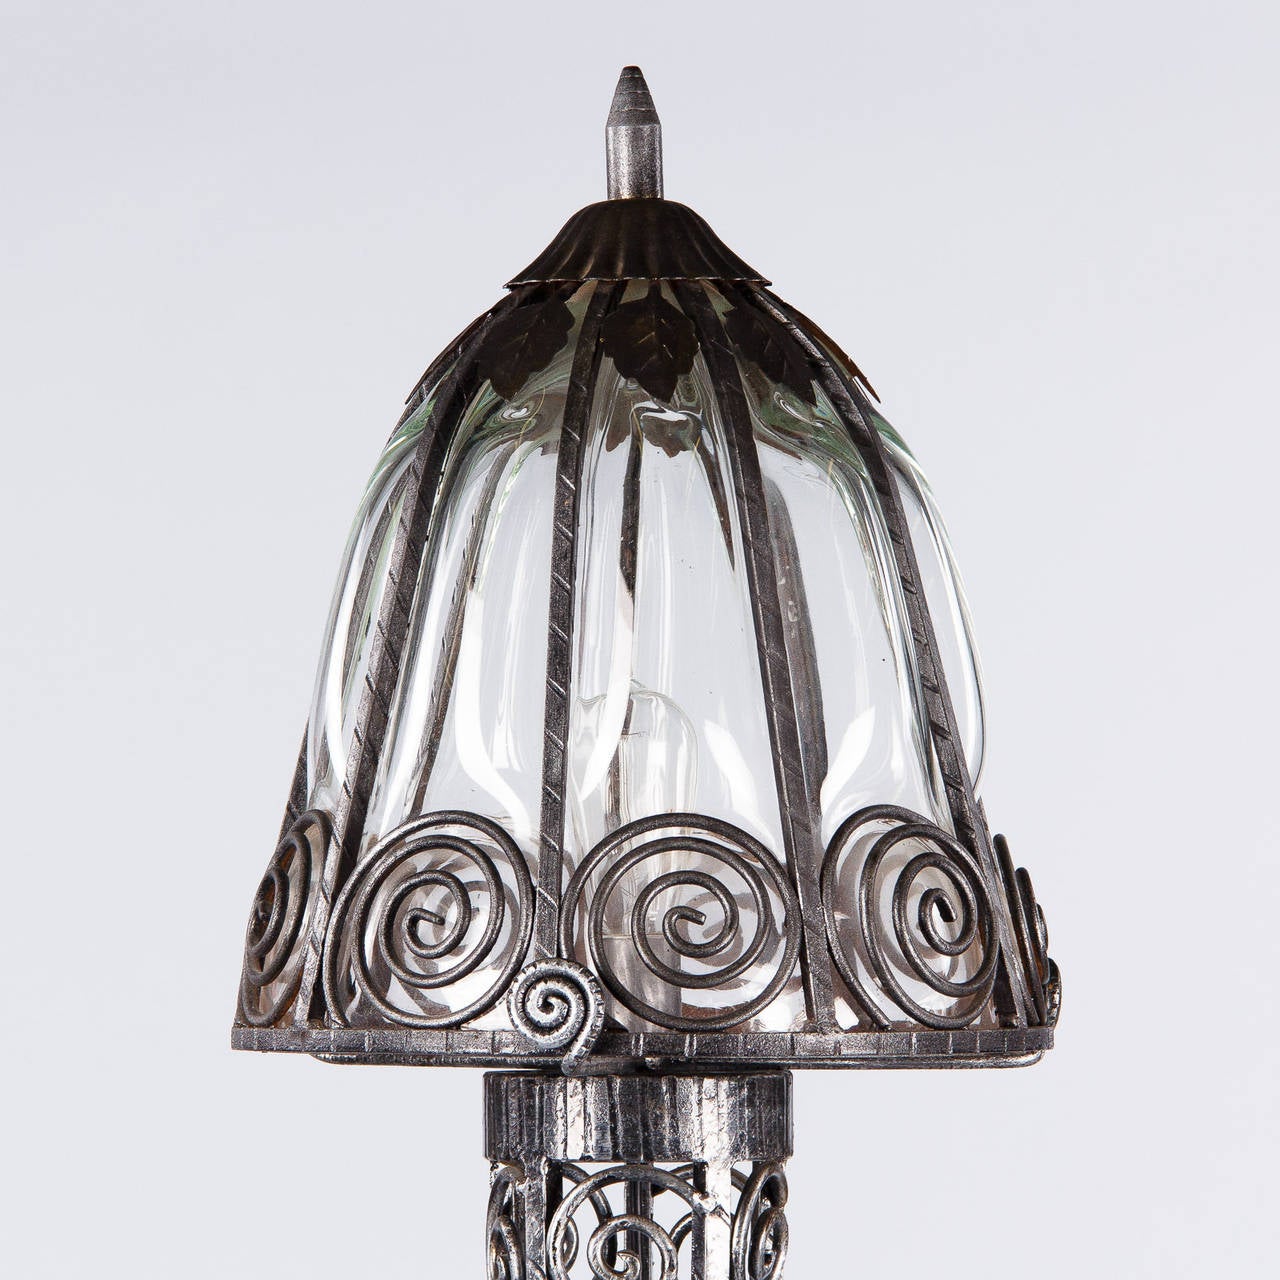 A wonderful floor lamp from the Art Deco period made of hammered forged iron with scroll design. The globe features handblown glass inside the iron and some grape leaf motifs. The lamp has been rewired with a single regular size light bulb up to 100